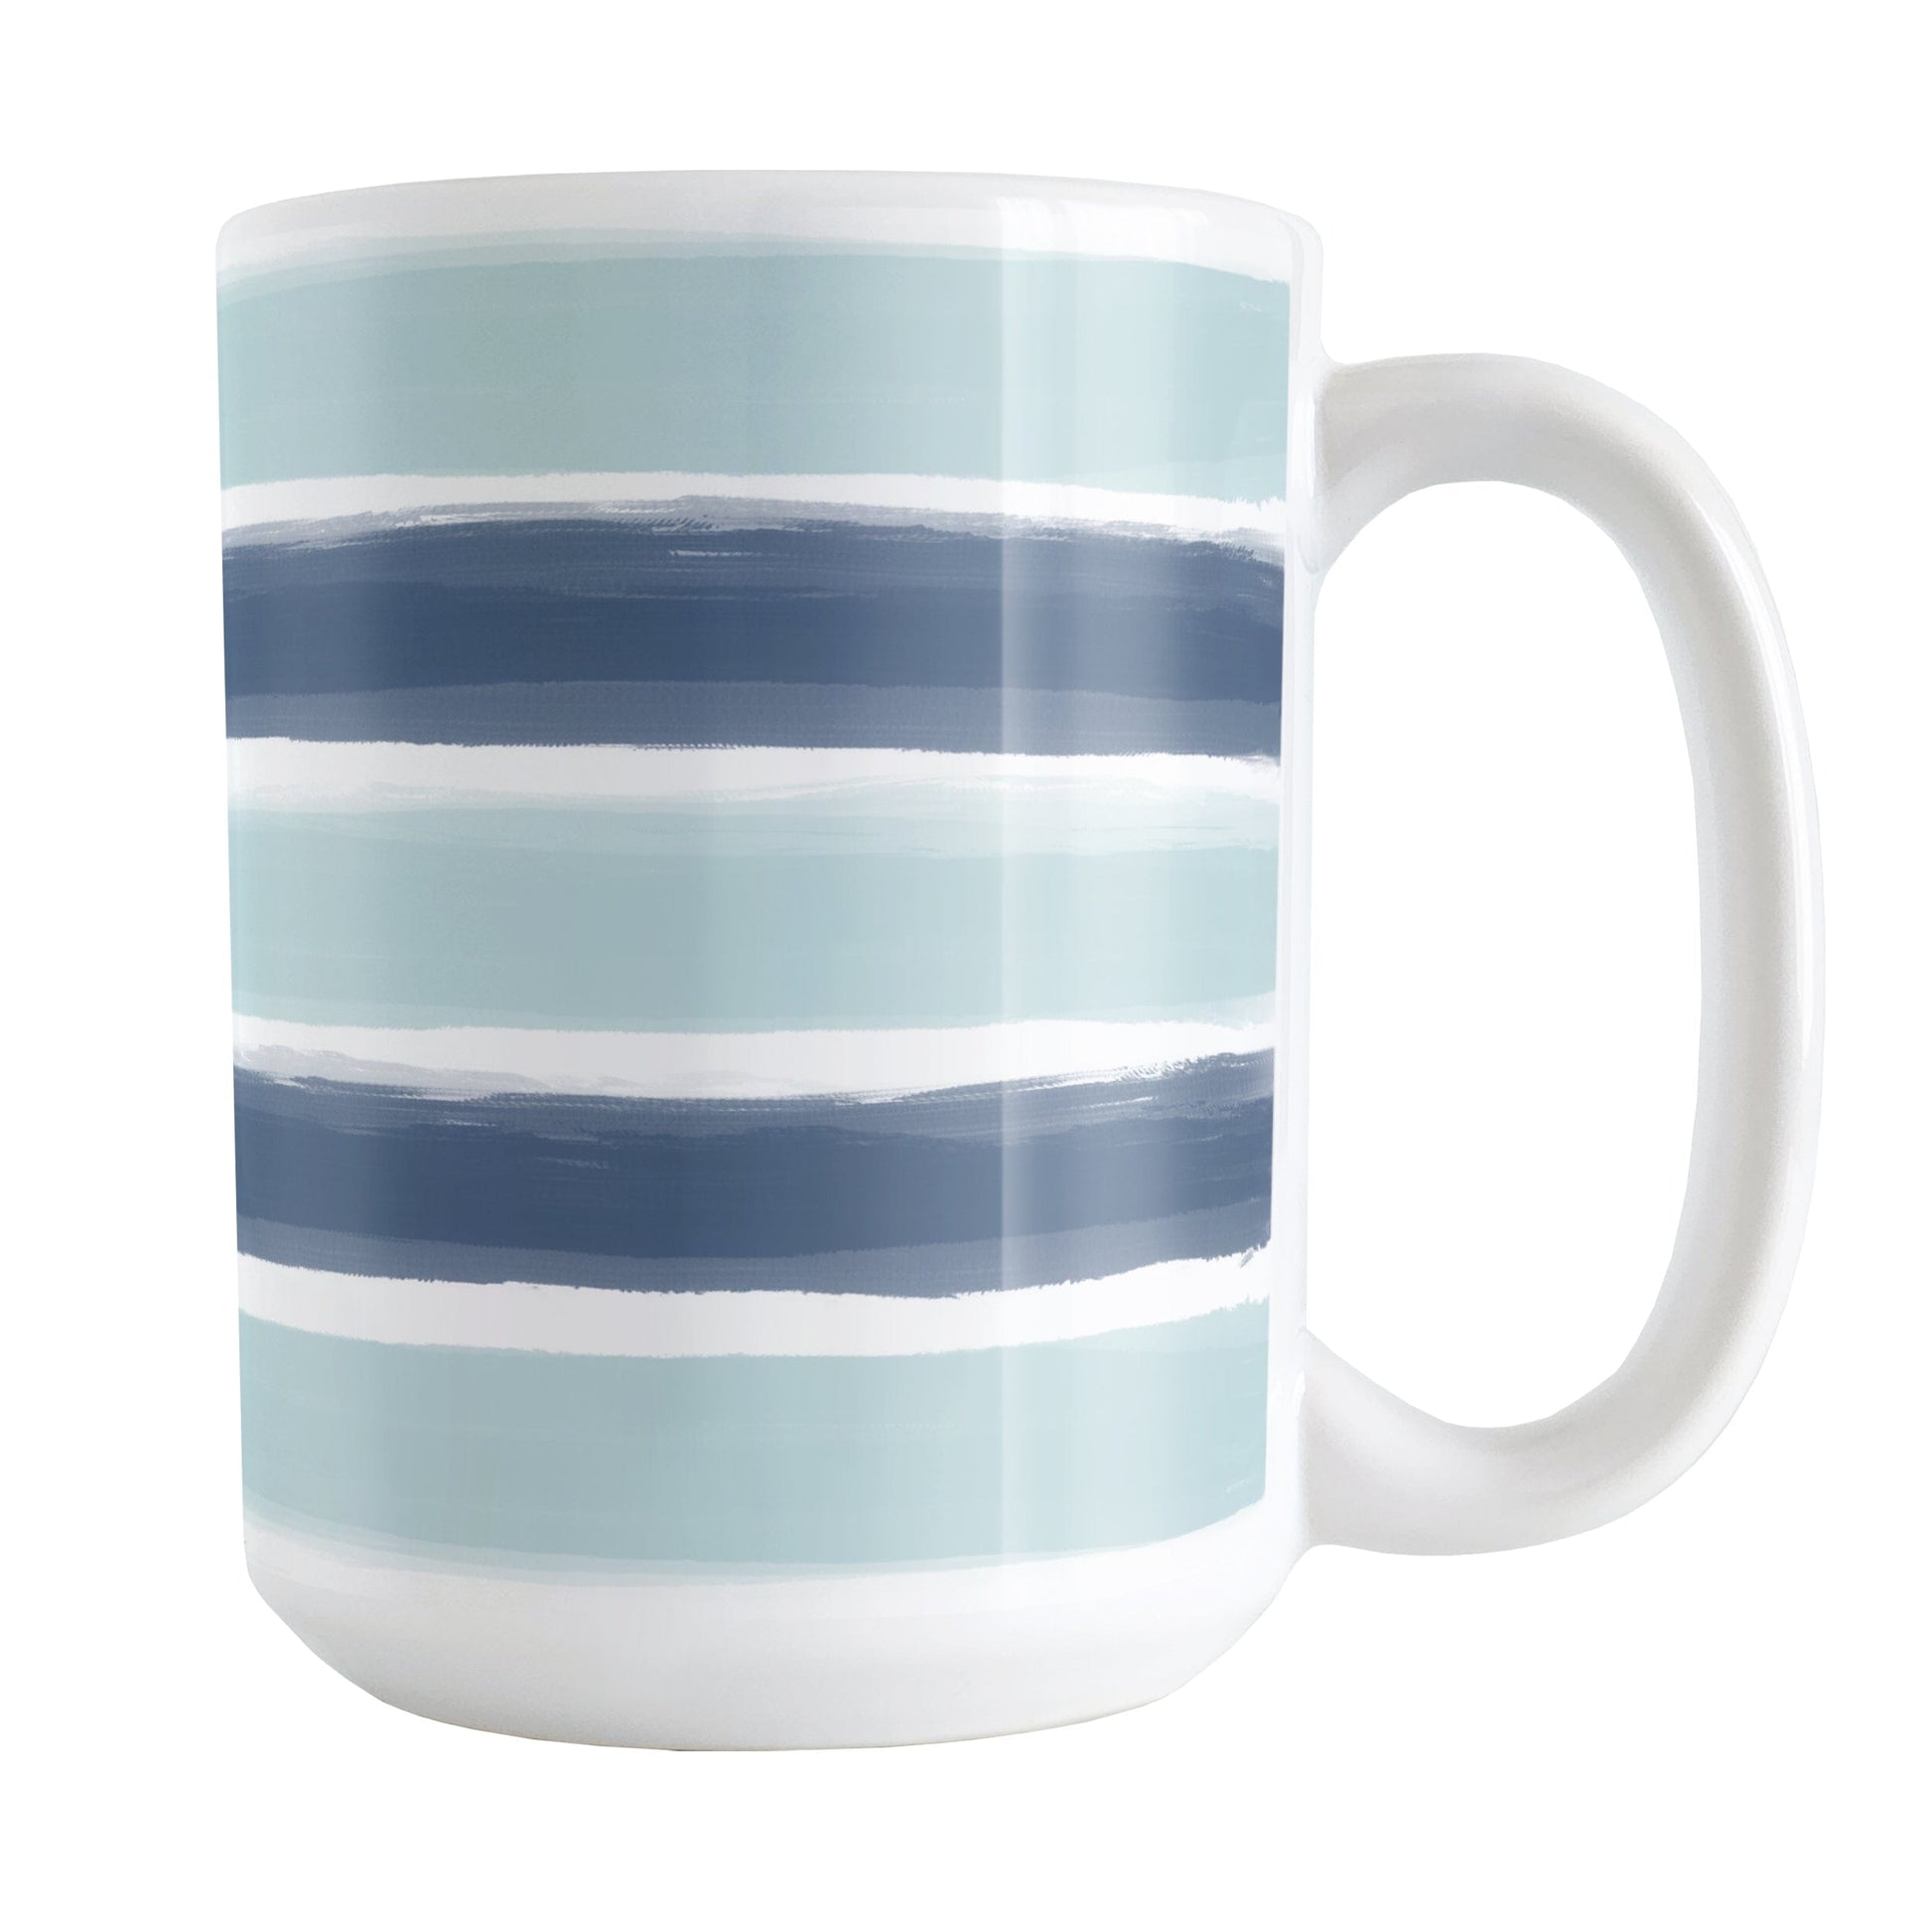 Coastal Blue Paint Strokes Mug (15oz) at Amy's Coffee Mugs. A ceramic coffee mug designed with a pattern of horizontal stripes done in a paint strokes illustration in coastal or nautical blue colors that wraps around the mug to the handle.